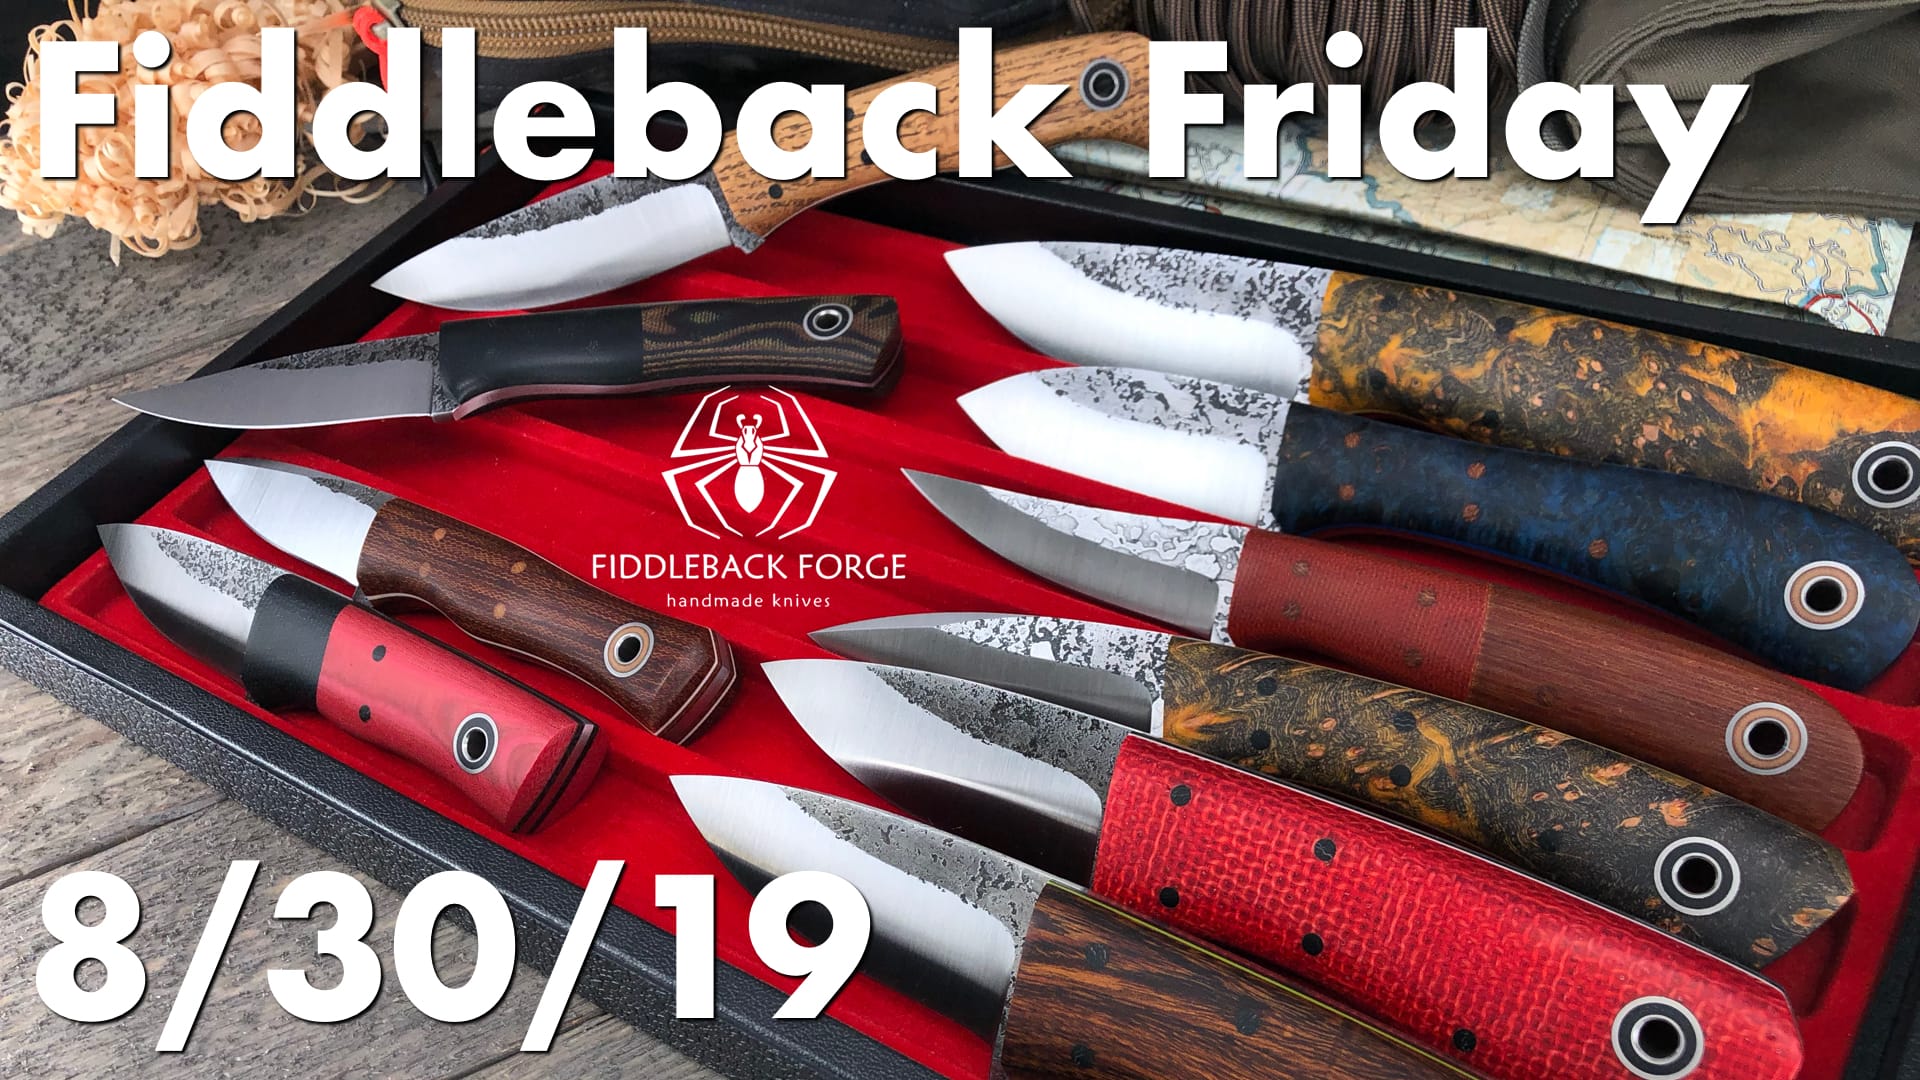 Fiddleback Friday 8/30/19 - Video Preview